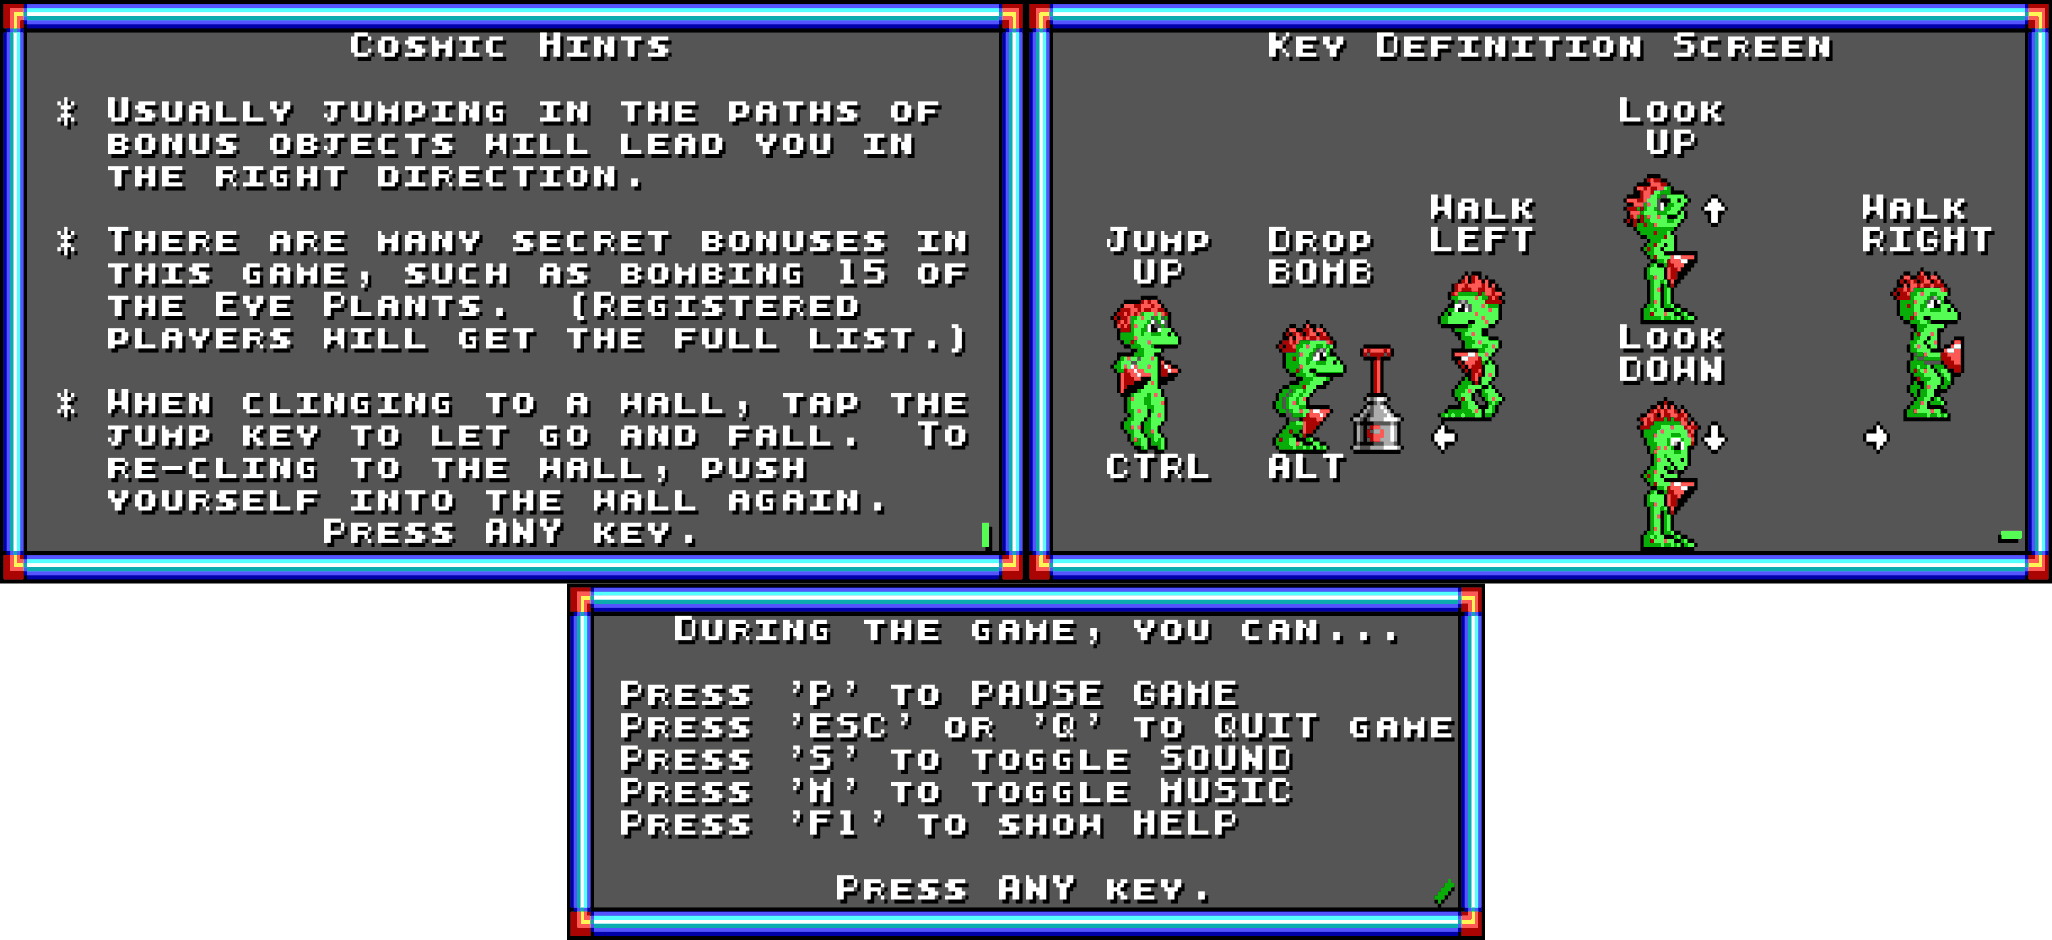 Hints and Keys Dialog Sequence